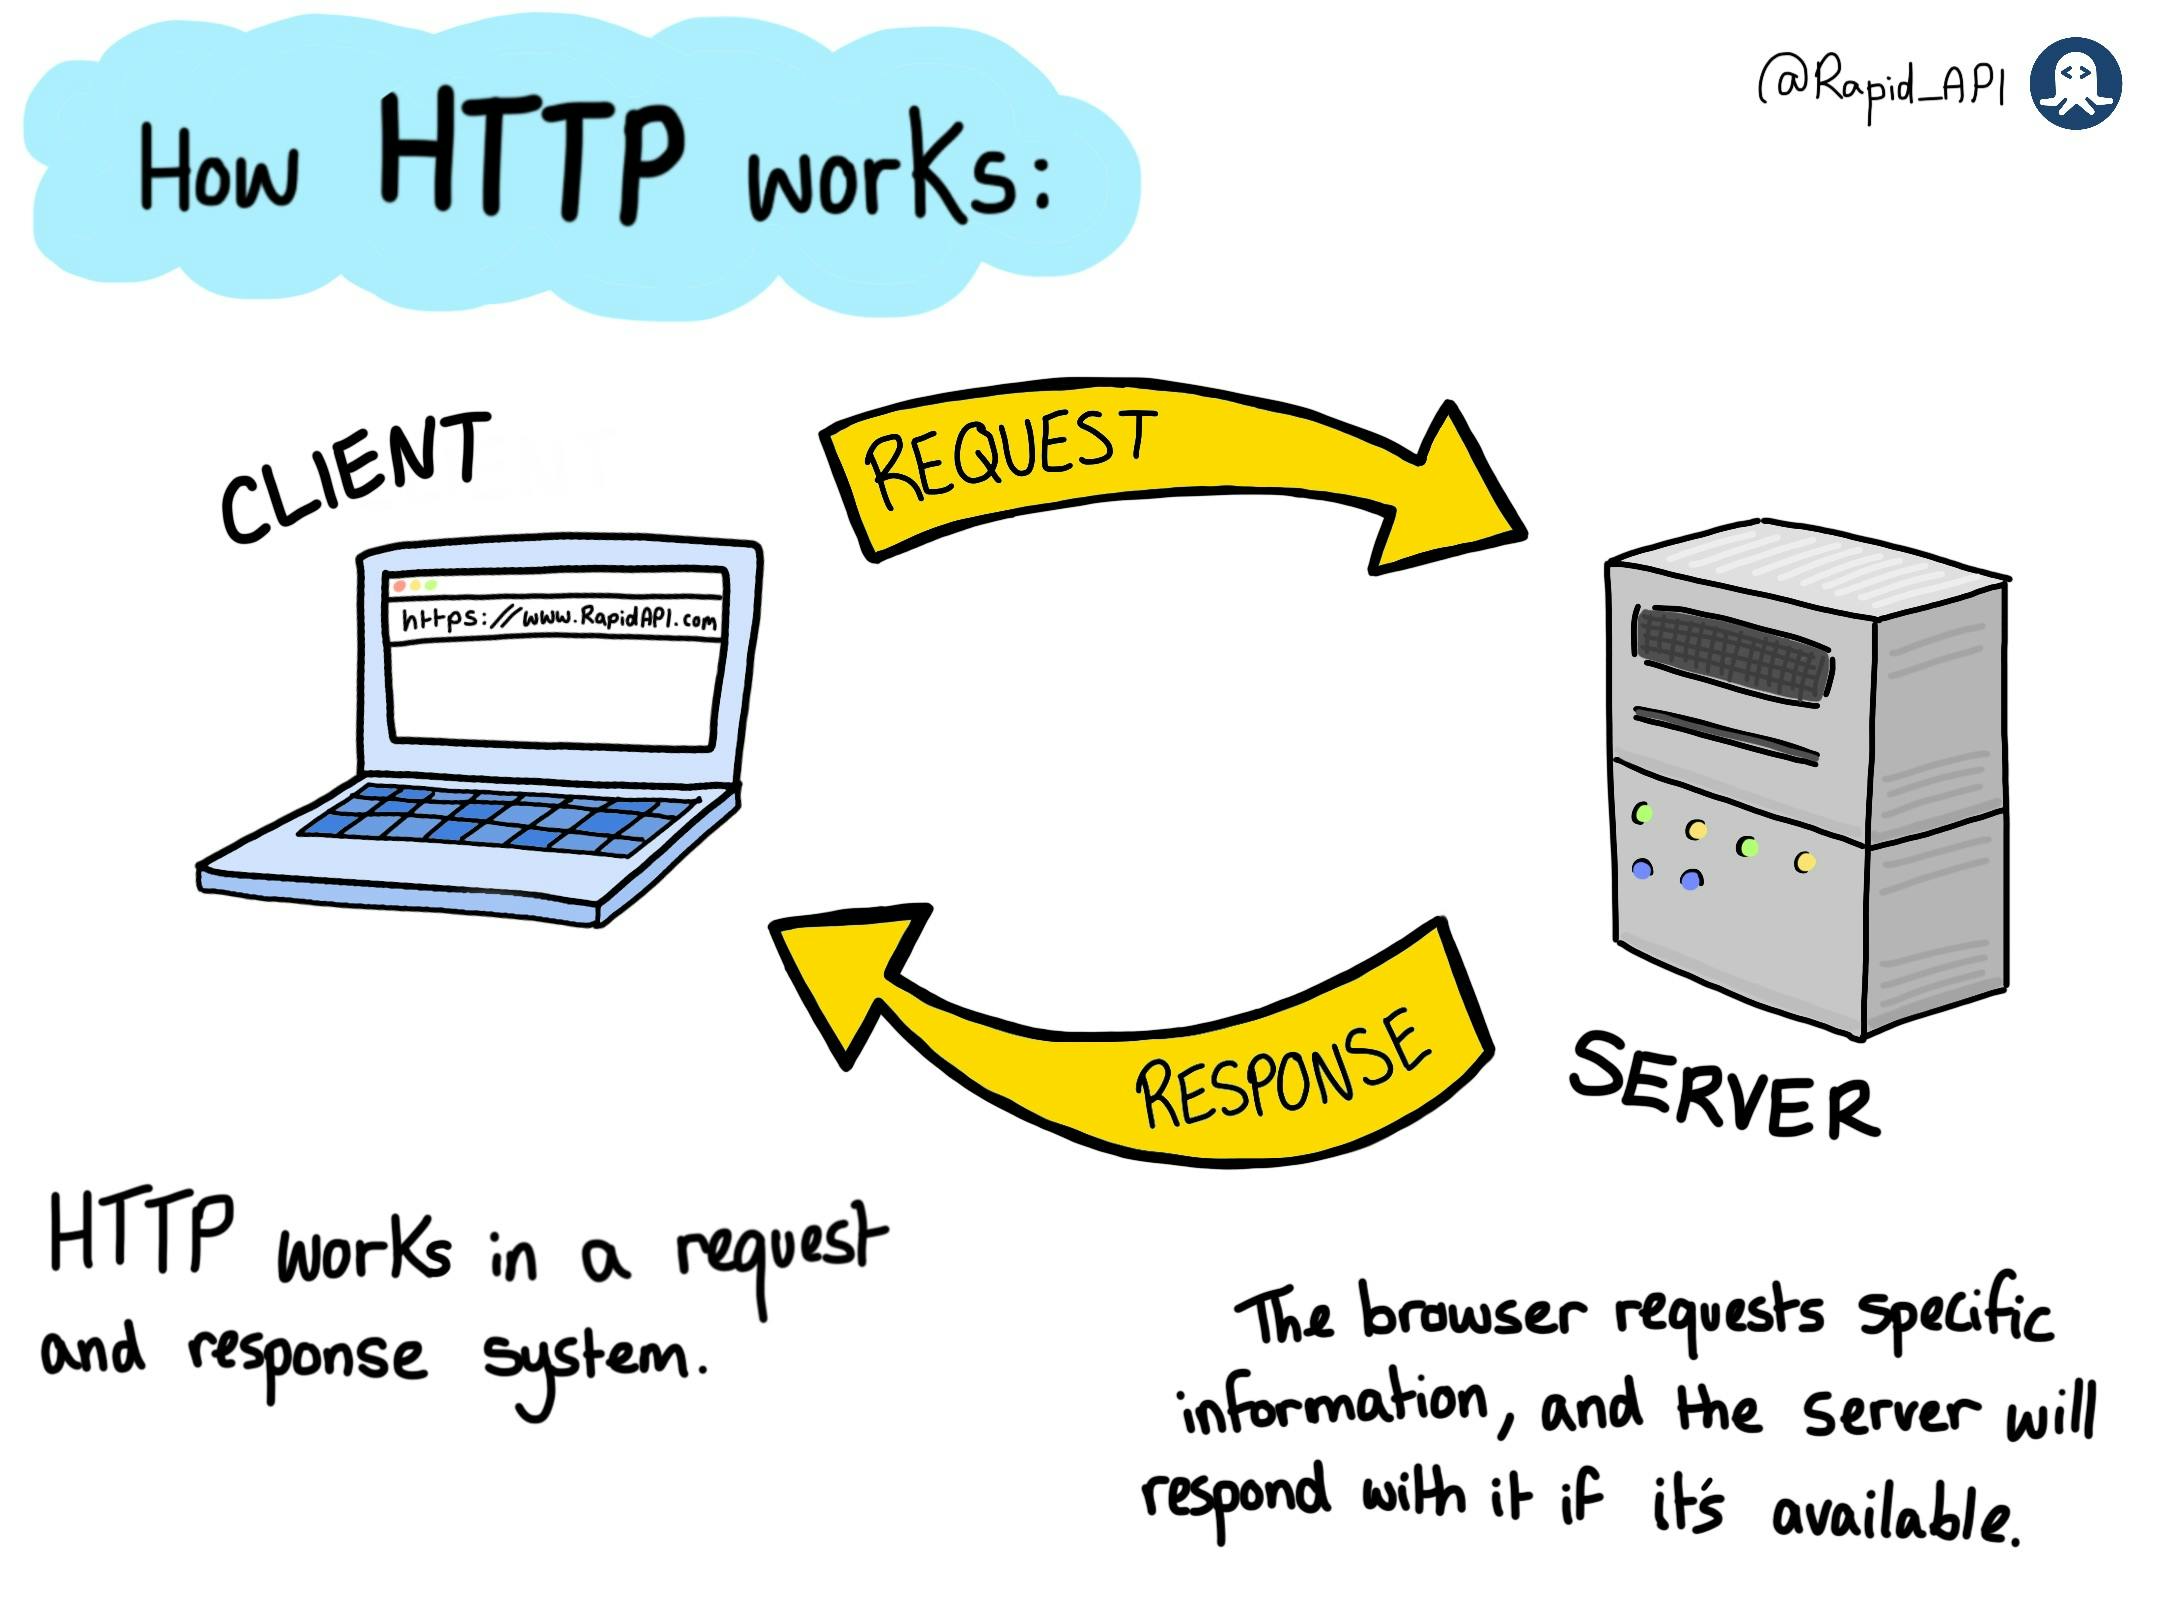 What is HTTP?